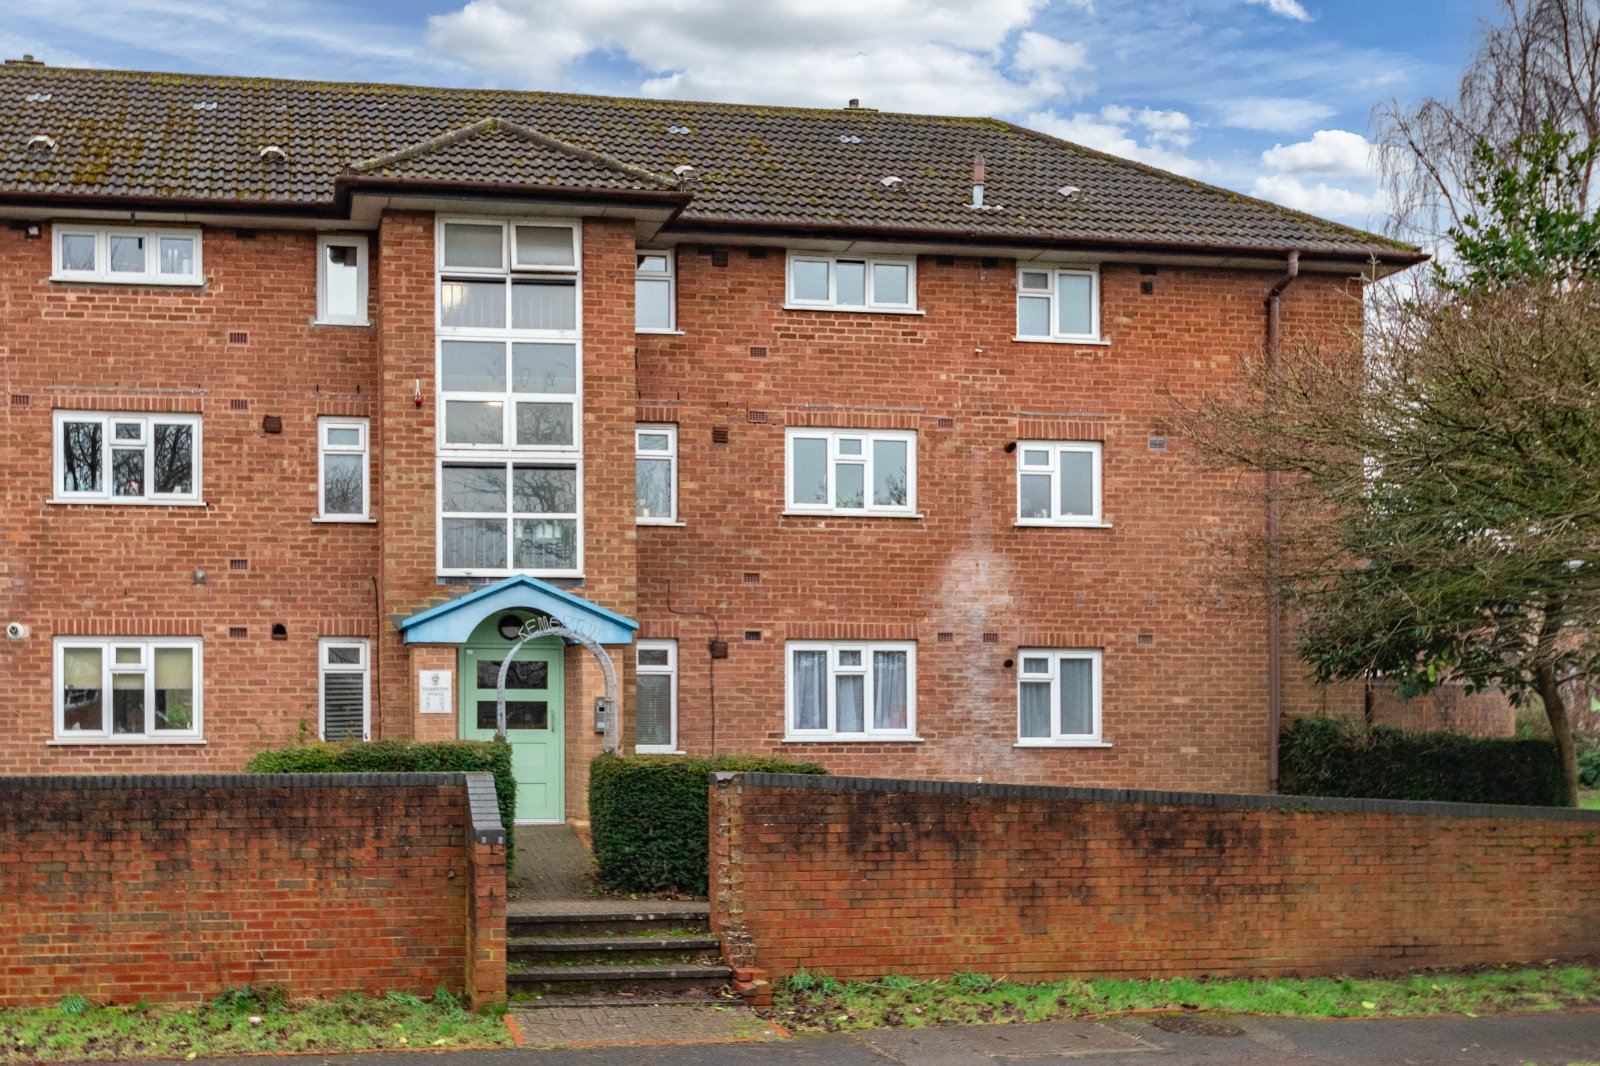 2 bed apartment for sale in Cherry Tree Walk, Redditch - Property Image 1